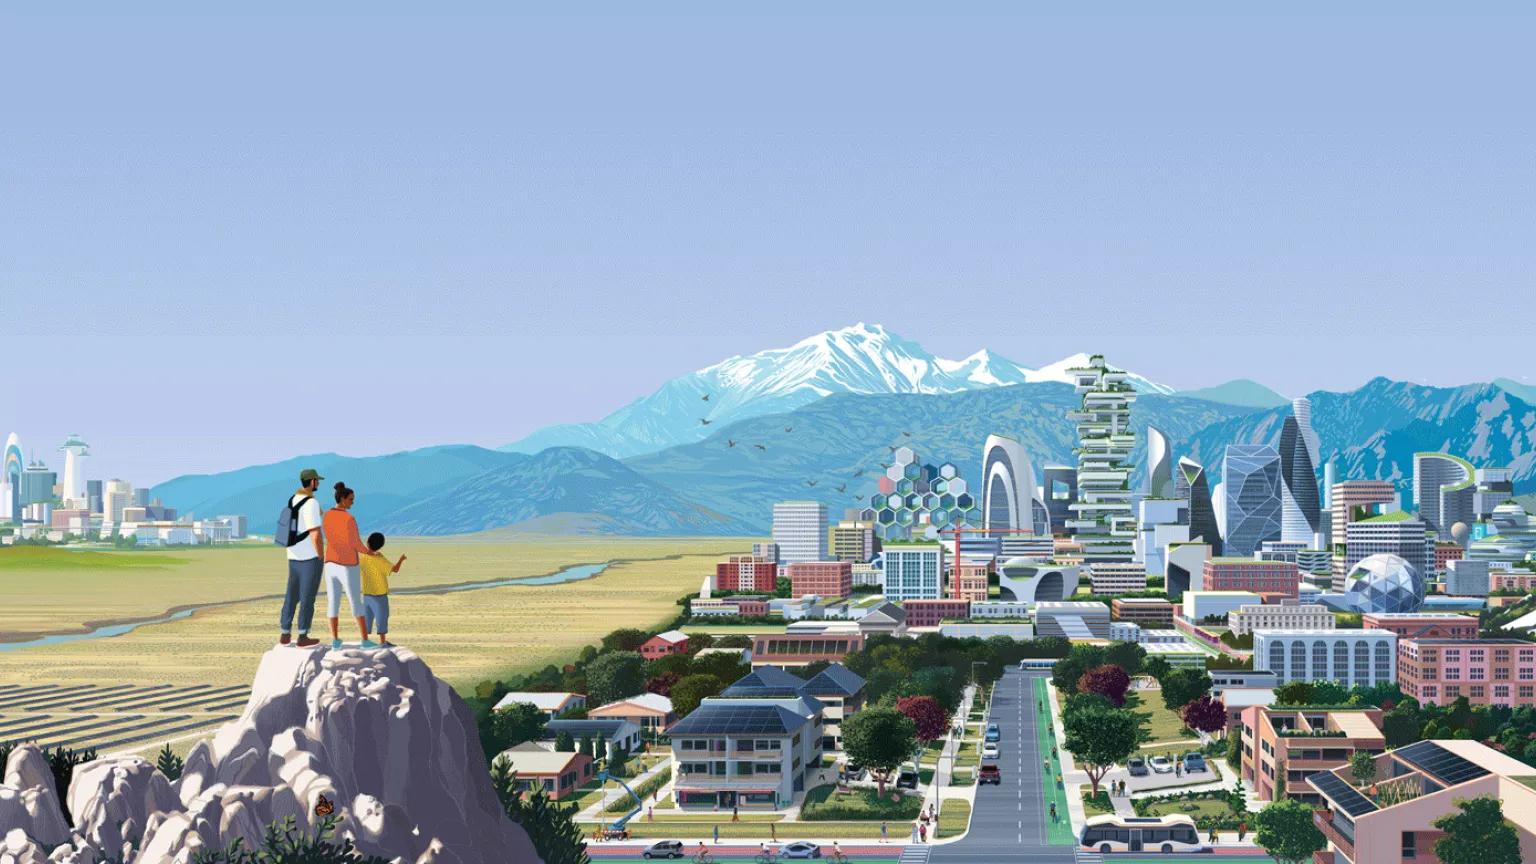 An illustration of a family standing on a mountain peak overlooking a futuristic cityscape with a wind turbine, buildings with rooftop solar panels and gardens, and a river and snowy mountain peaks in the distance